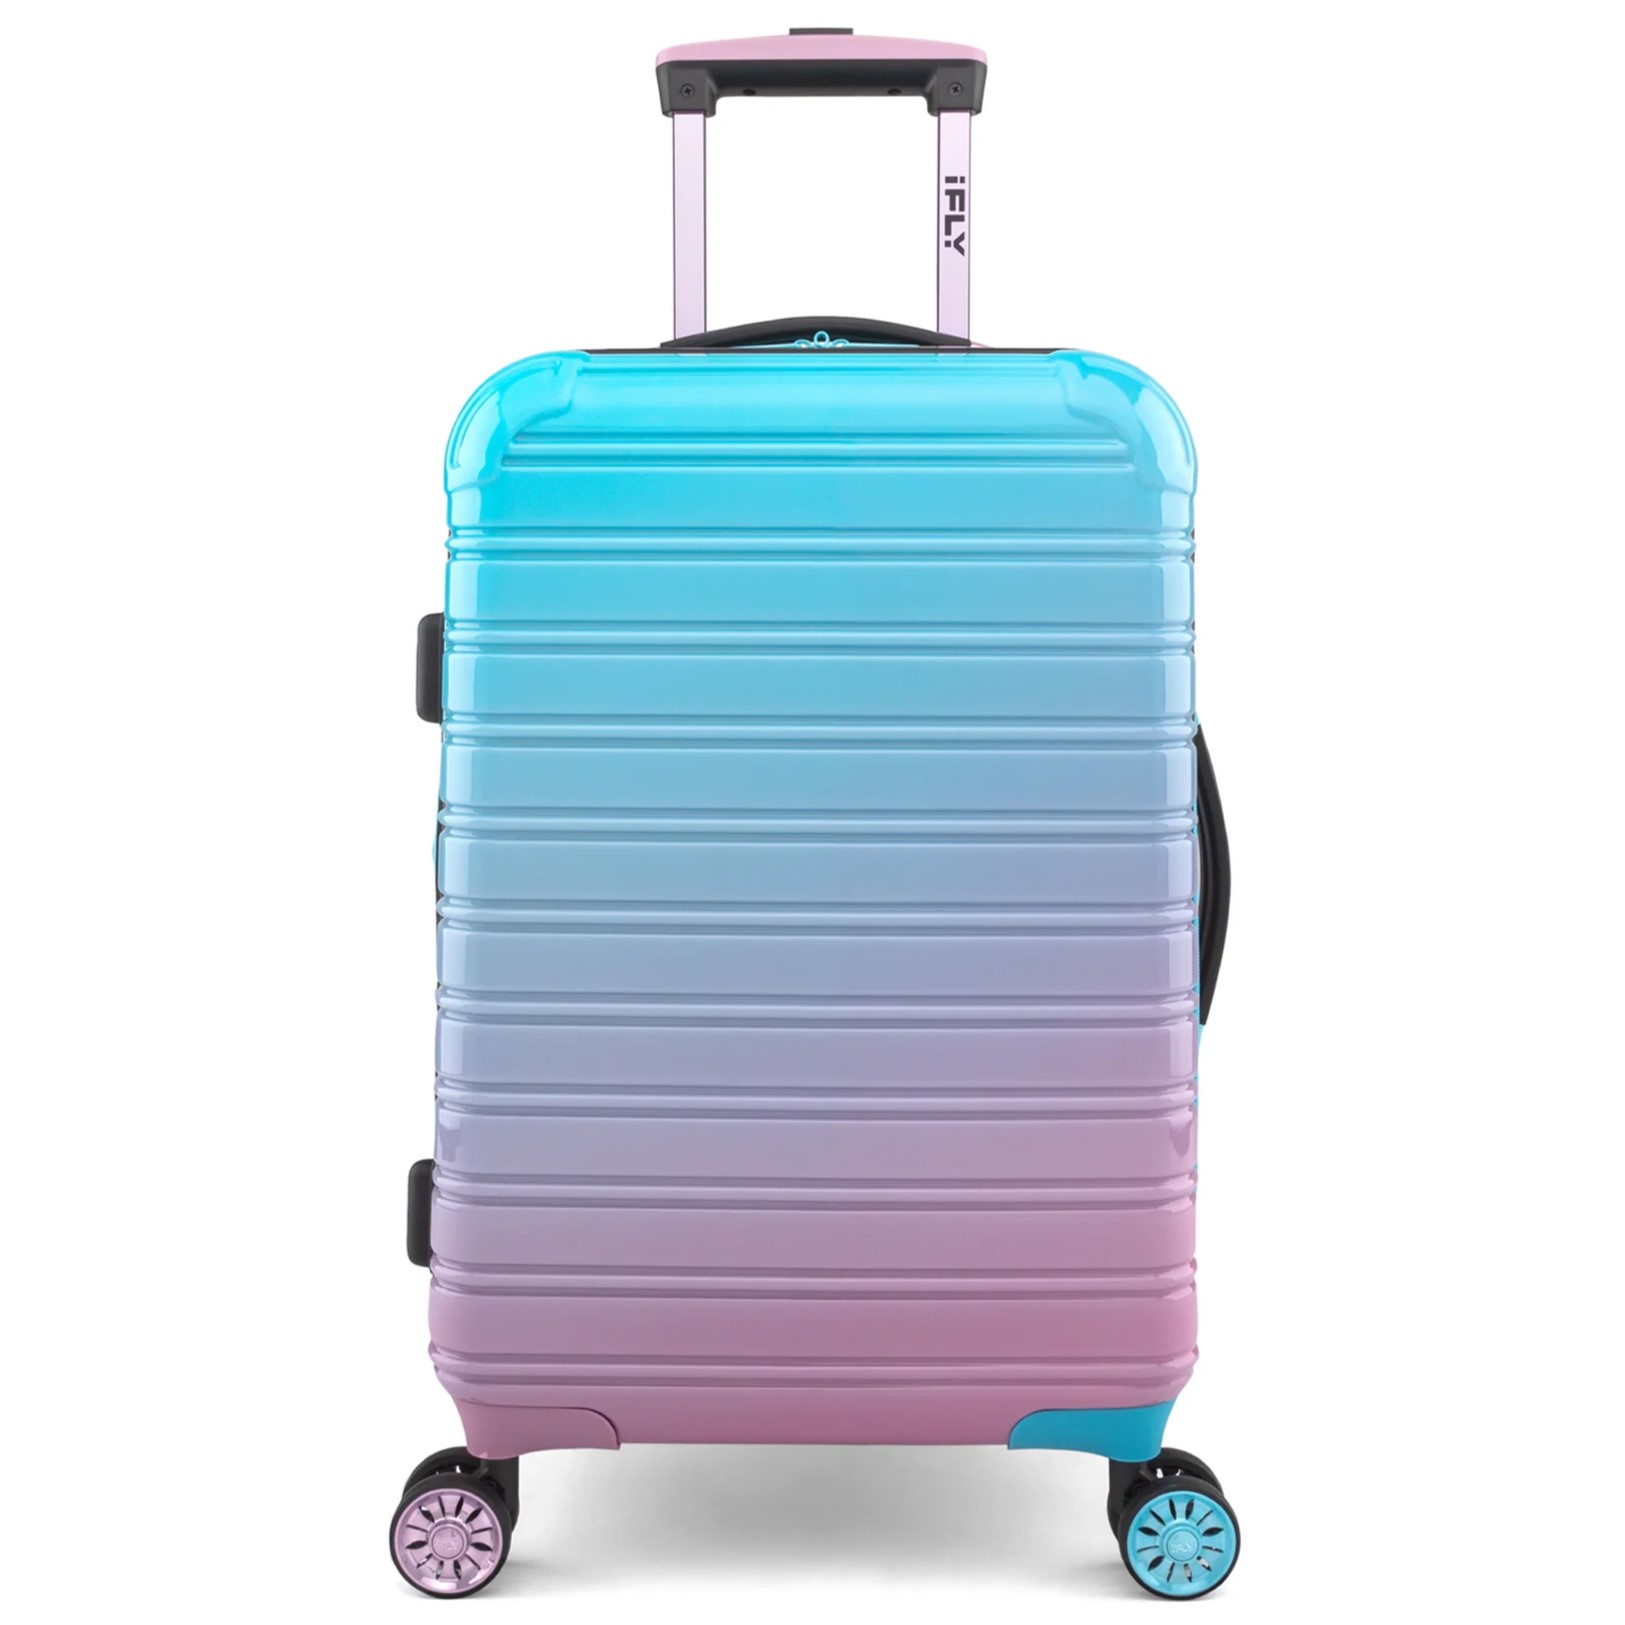 VALI DU LỊCH IFLY FIBERTECH OMBRE HARDSIDE LUGGAGE IN COTTON CANDY 11